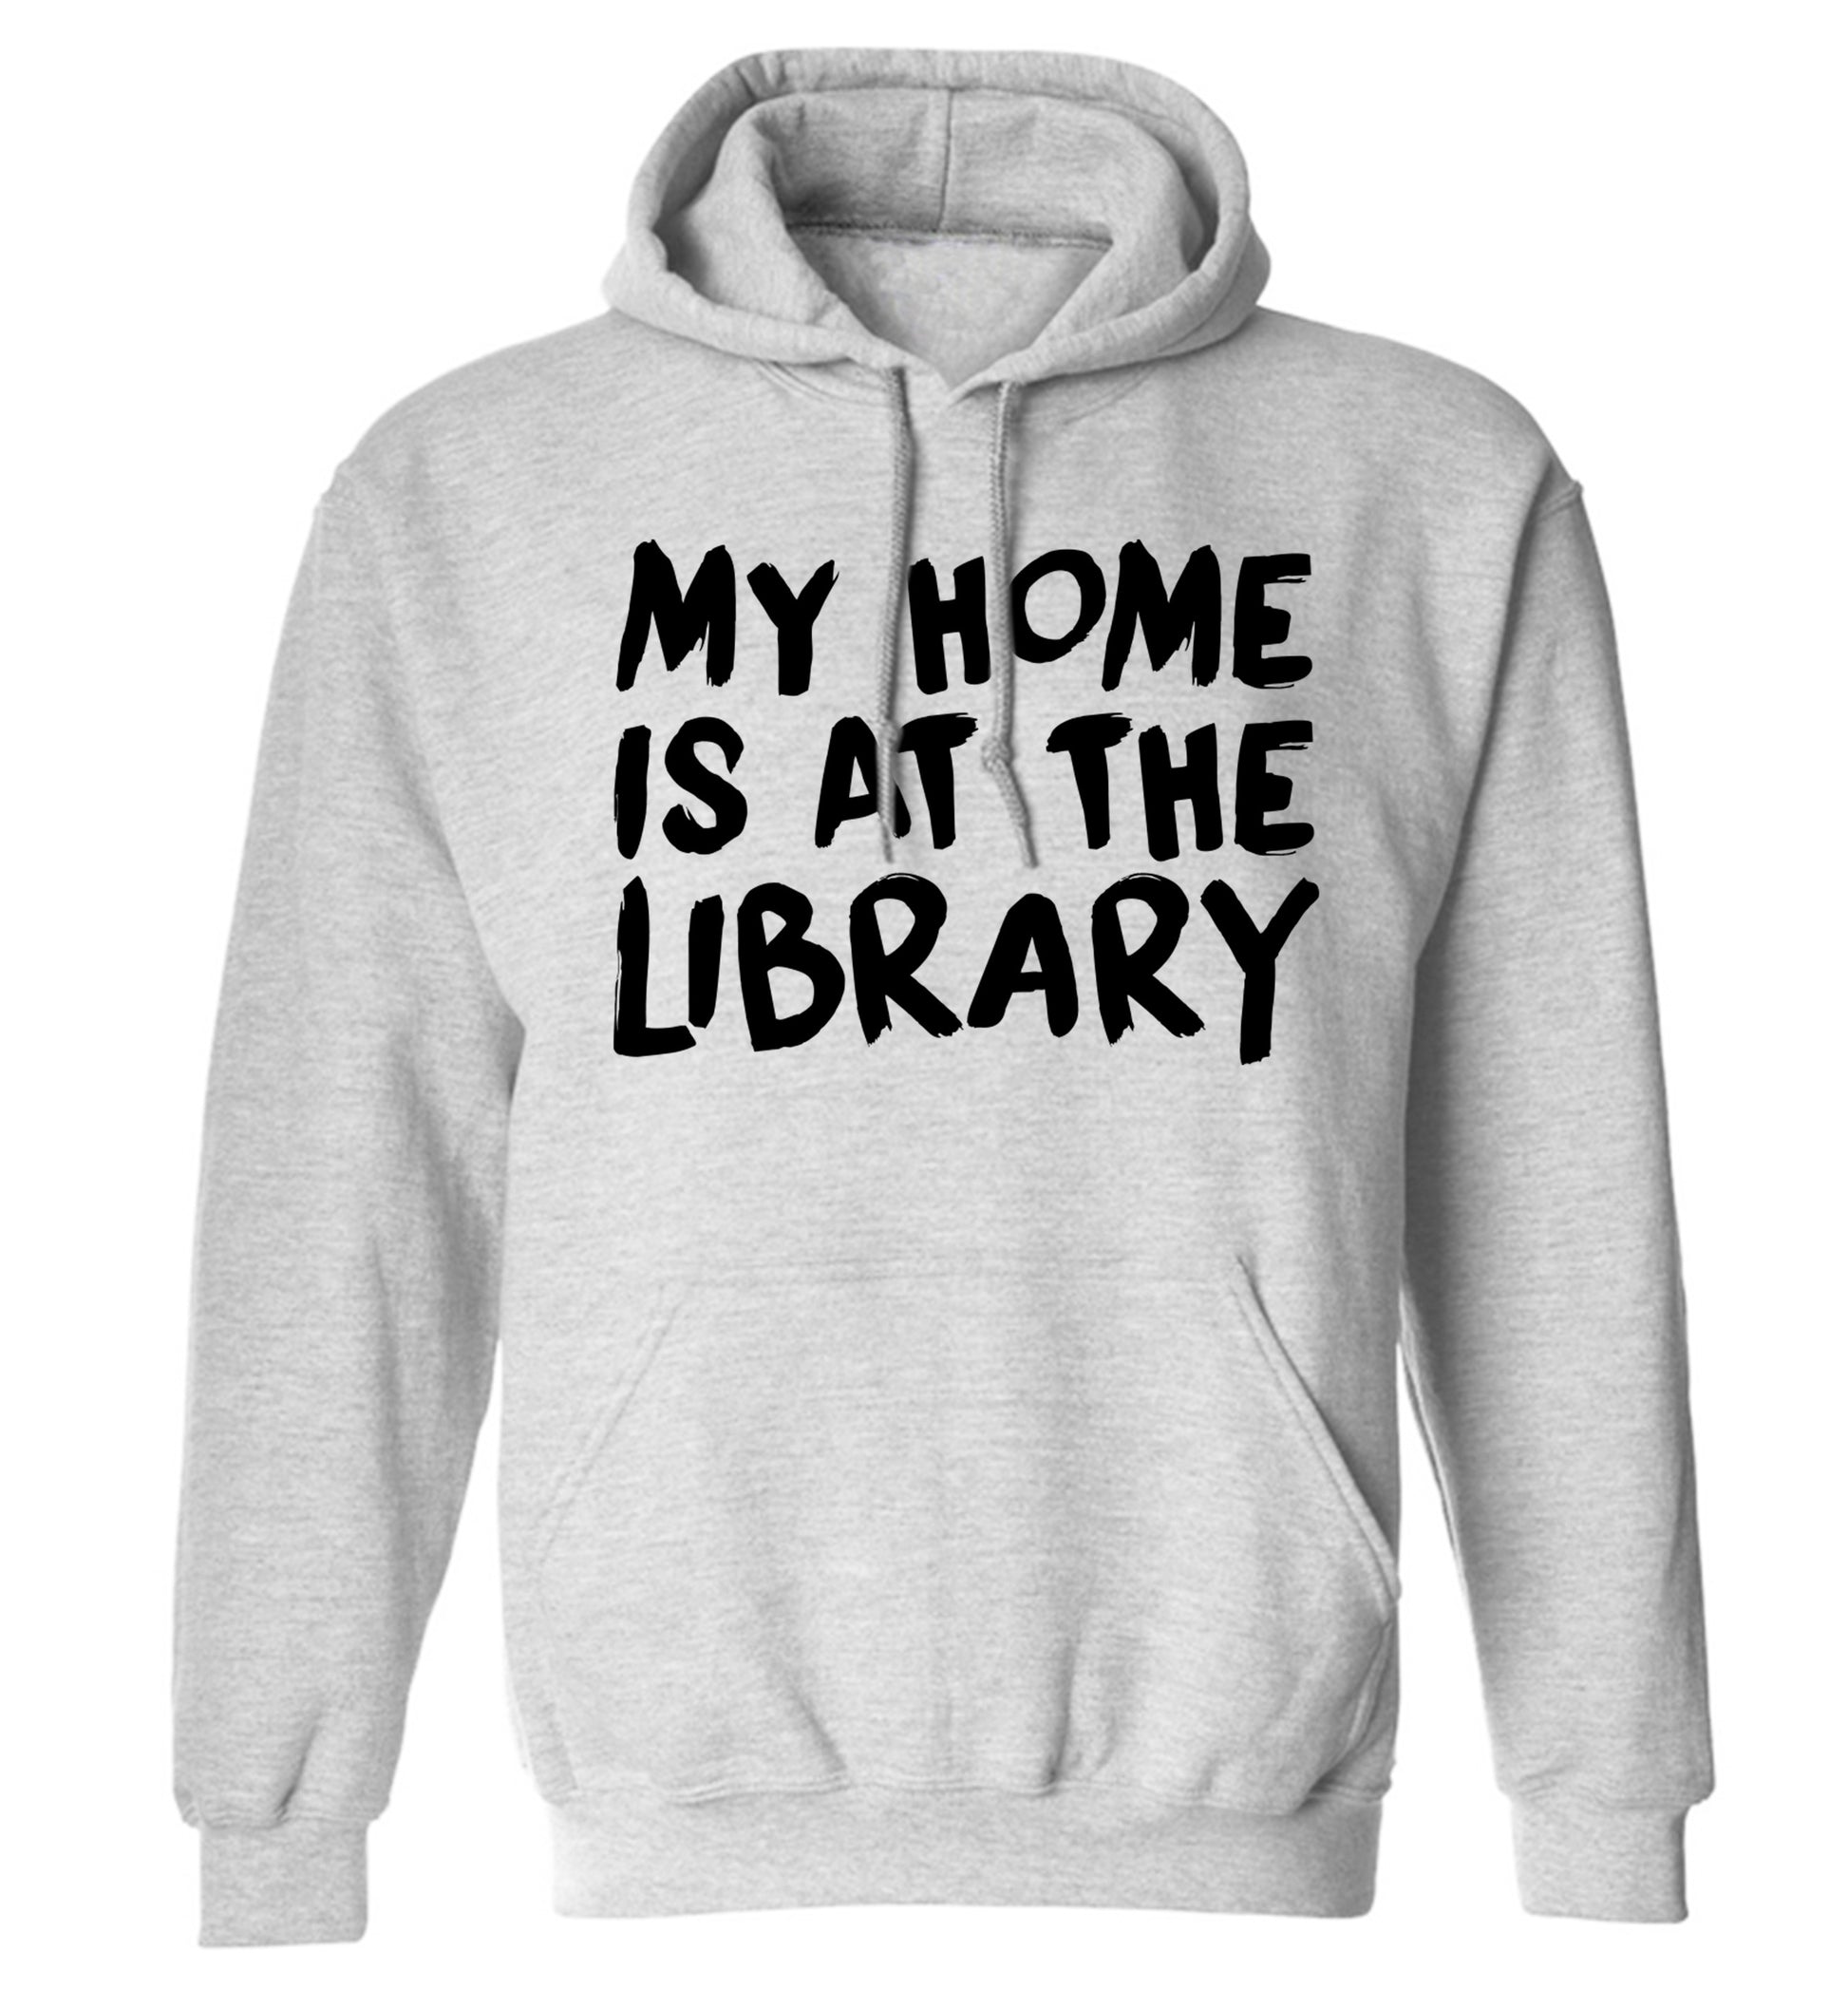 My home is at the library adults unisex grey hoodie 2XL